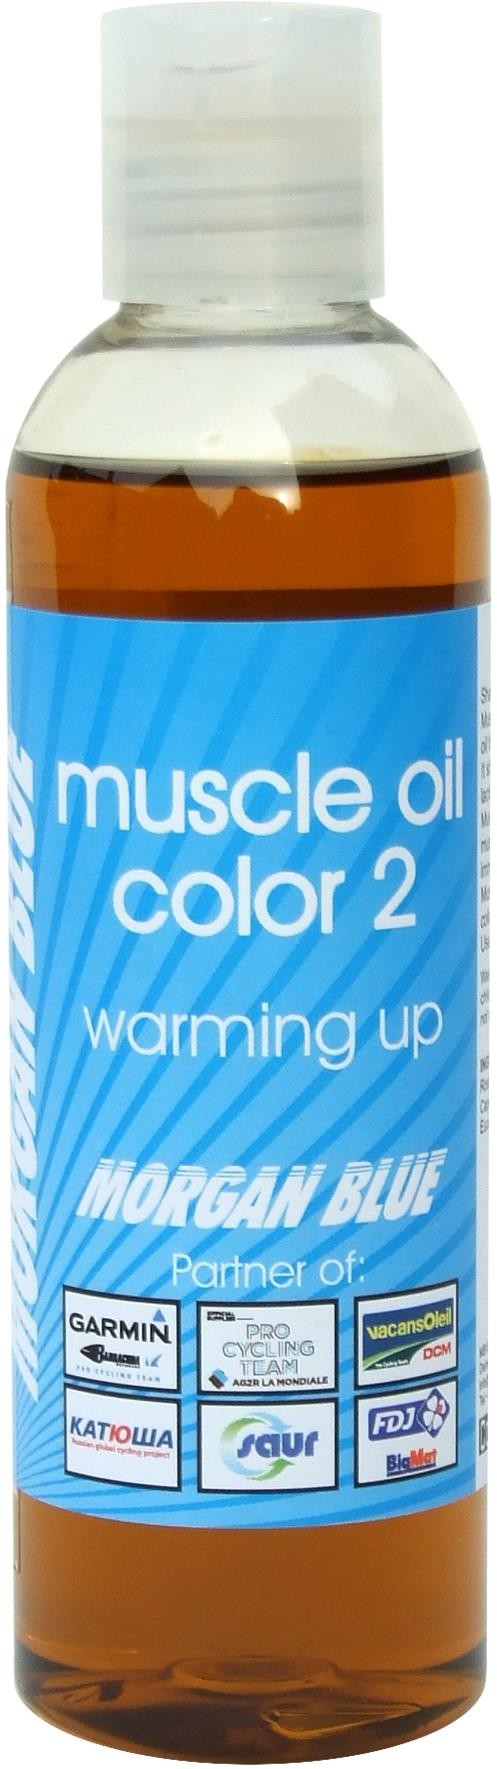 Muscle Oil Color 2 image 0